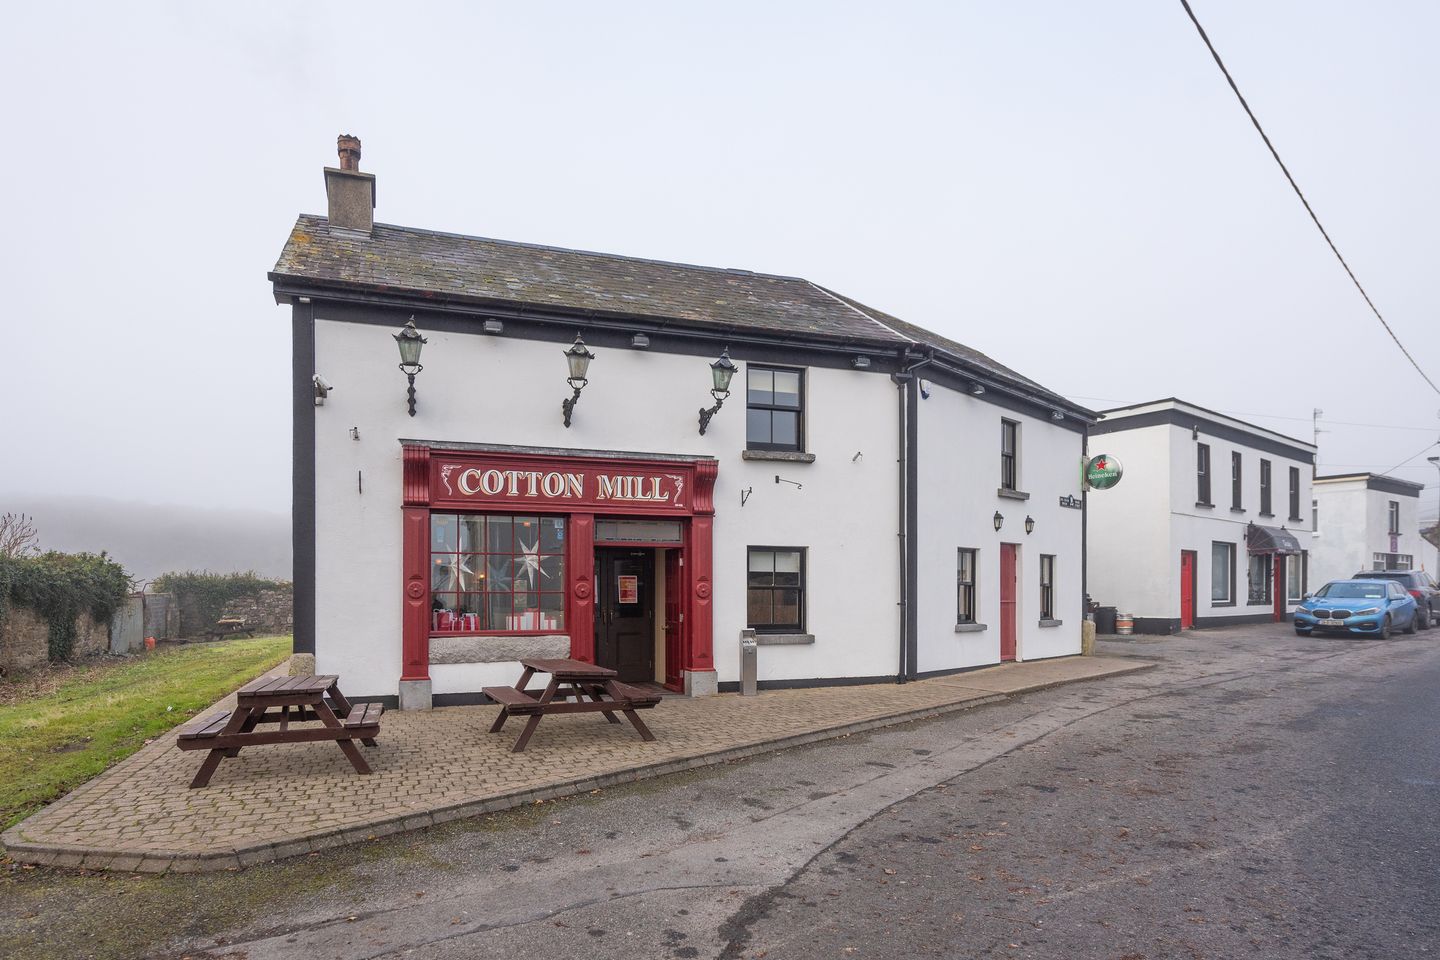 The Cotton Mill, Main Street, Portlaw, Co. Waterford